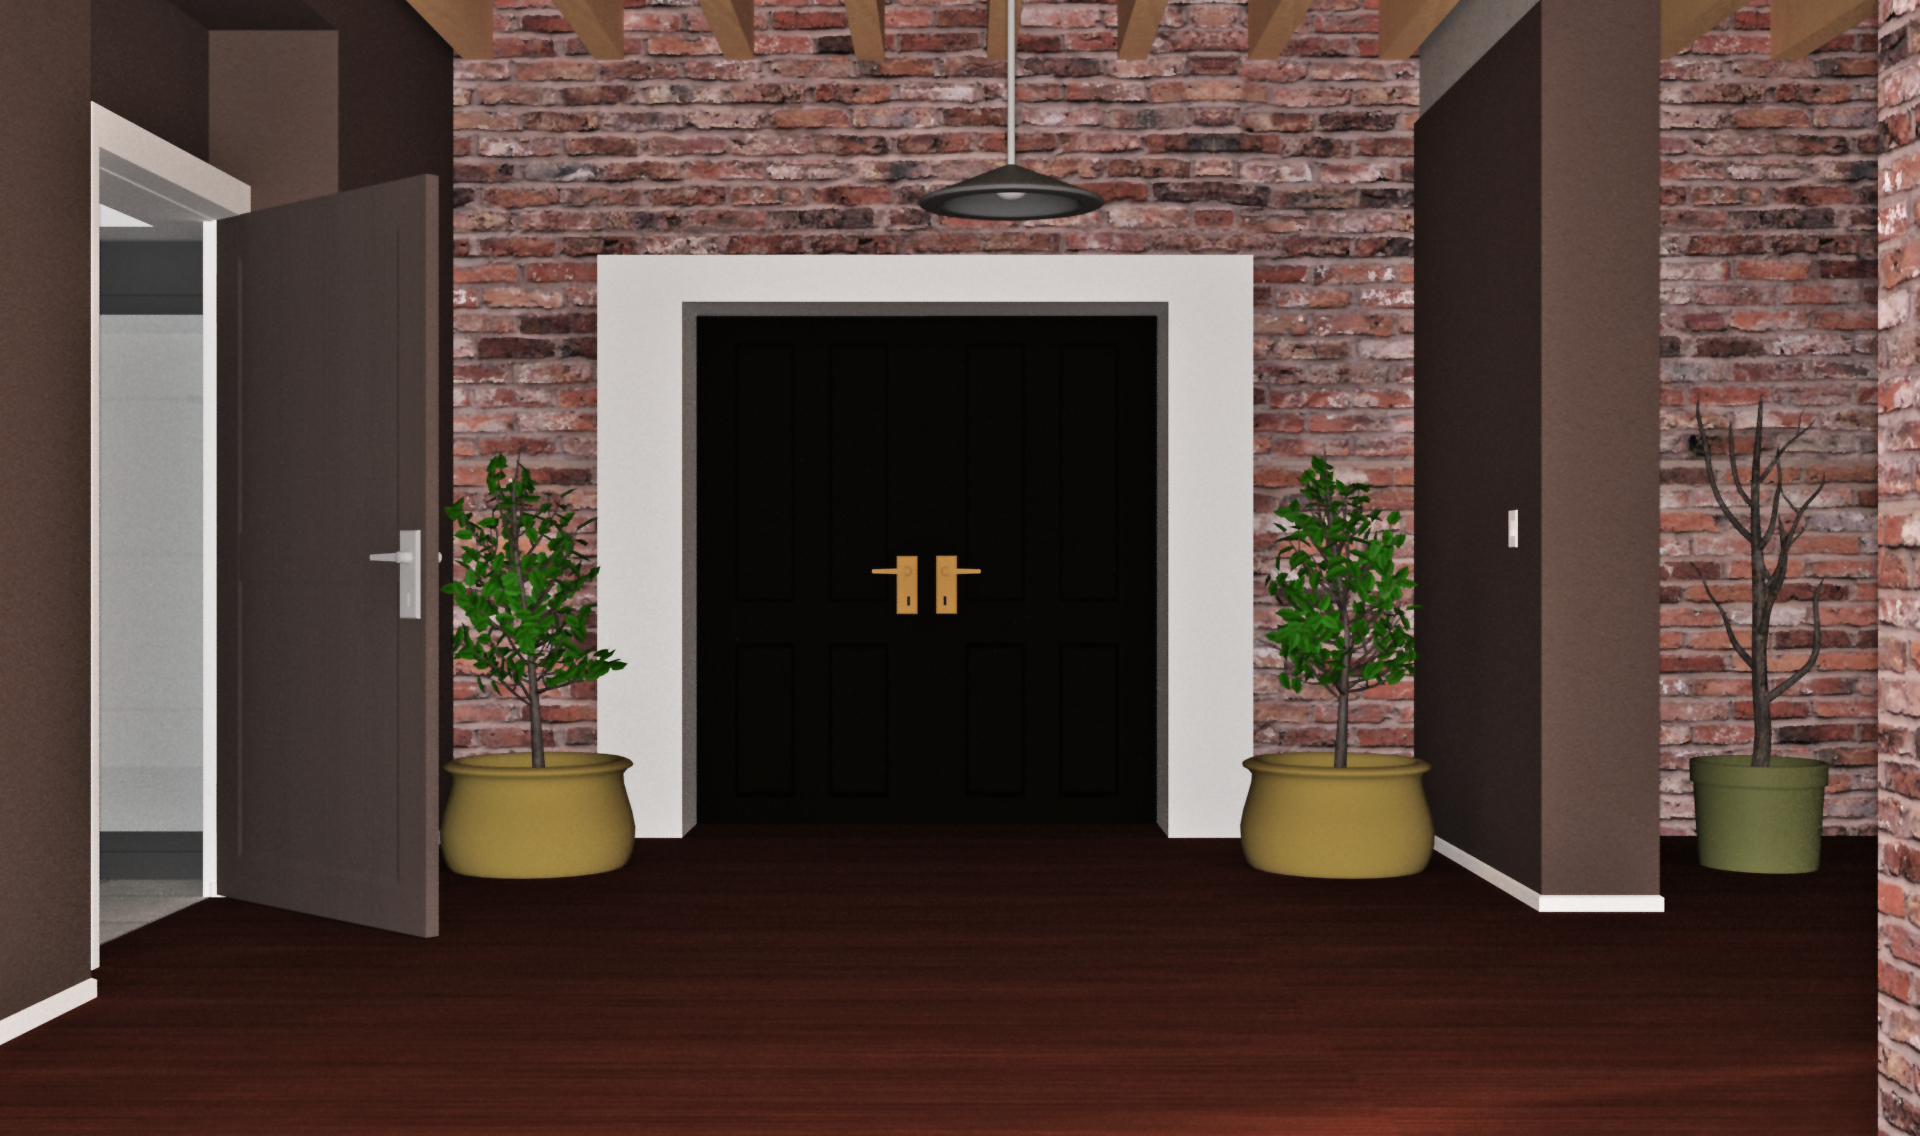 INT. MODERN HOME ENTRANCE 2 – DAY